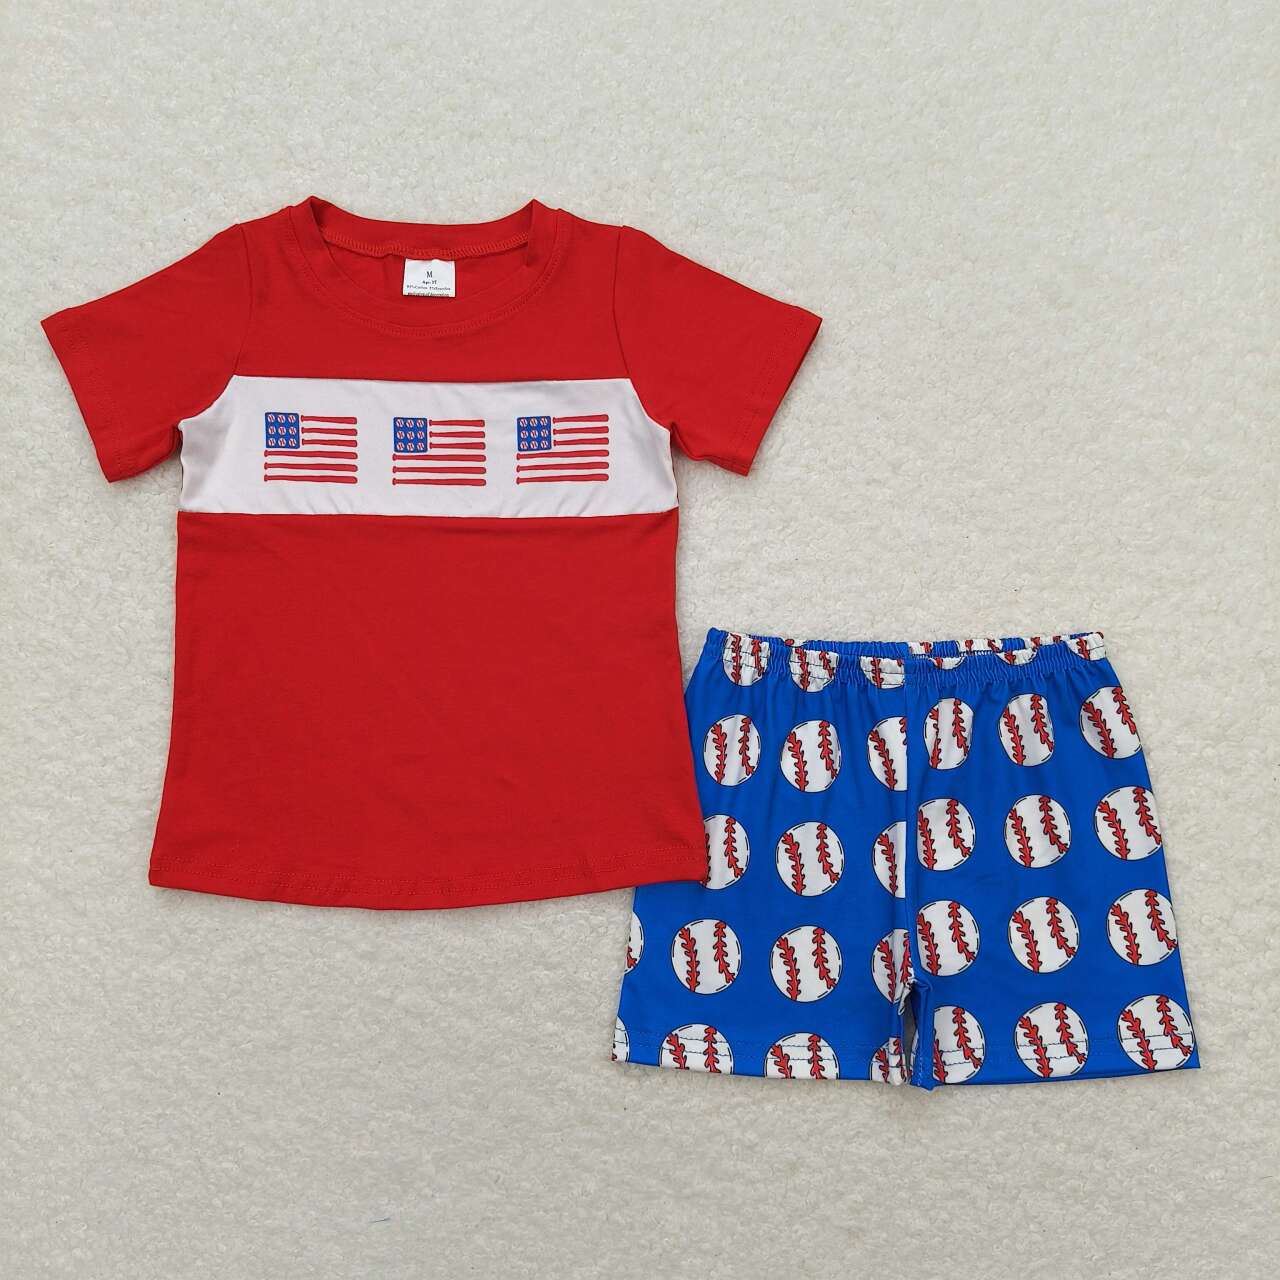 BSSO0674  Flags Red Top Baseball Shorts Boys 4th of July Clothes Set